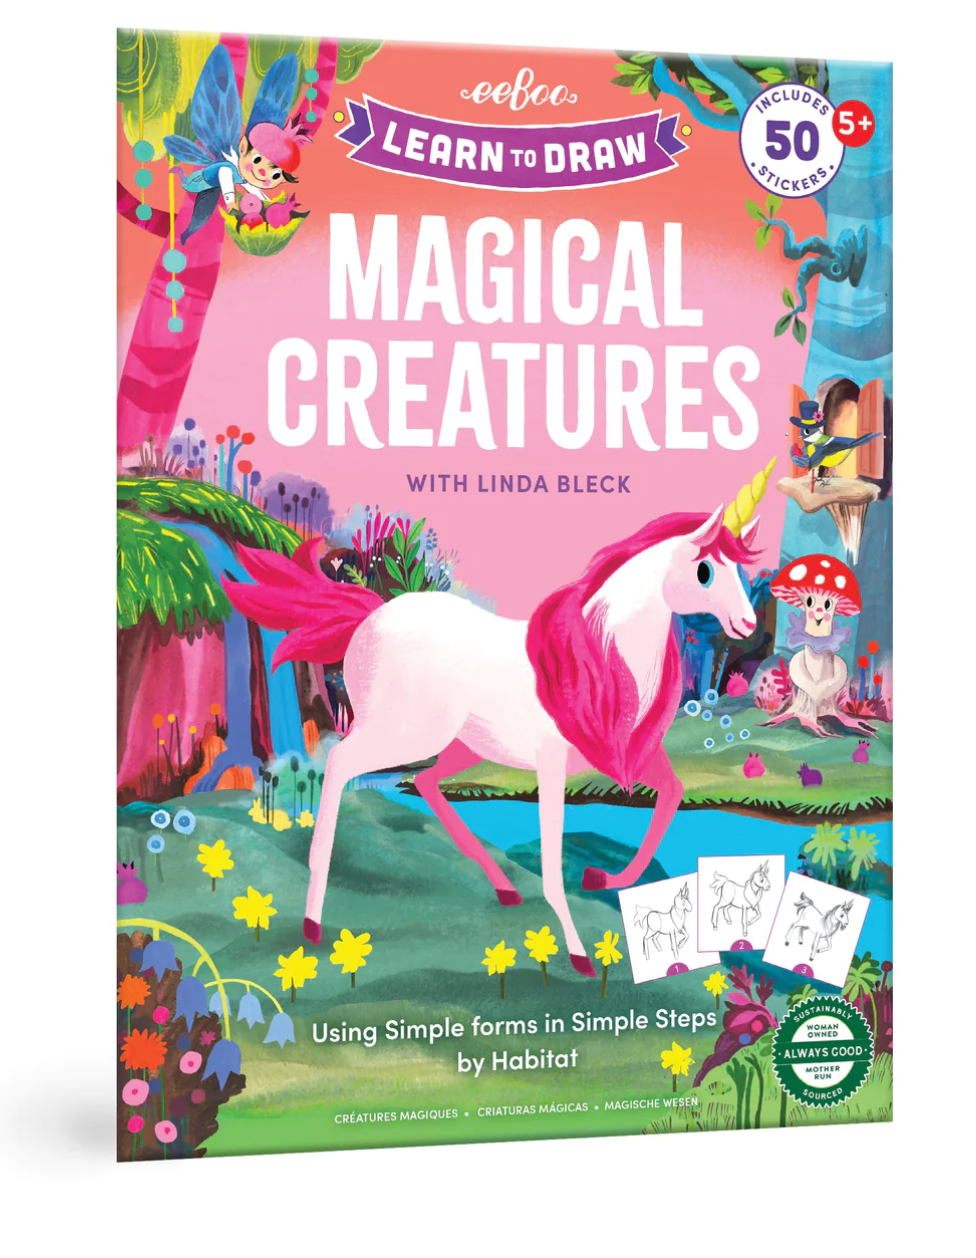 LEARN TO DRAW MAGICAL CREATURES